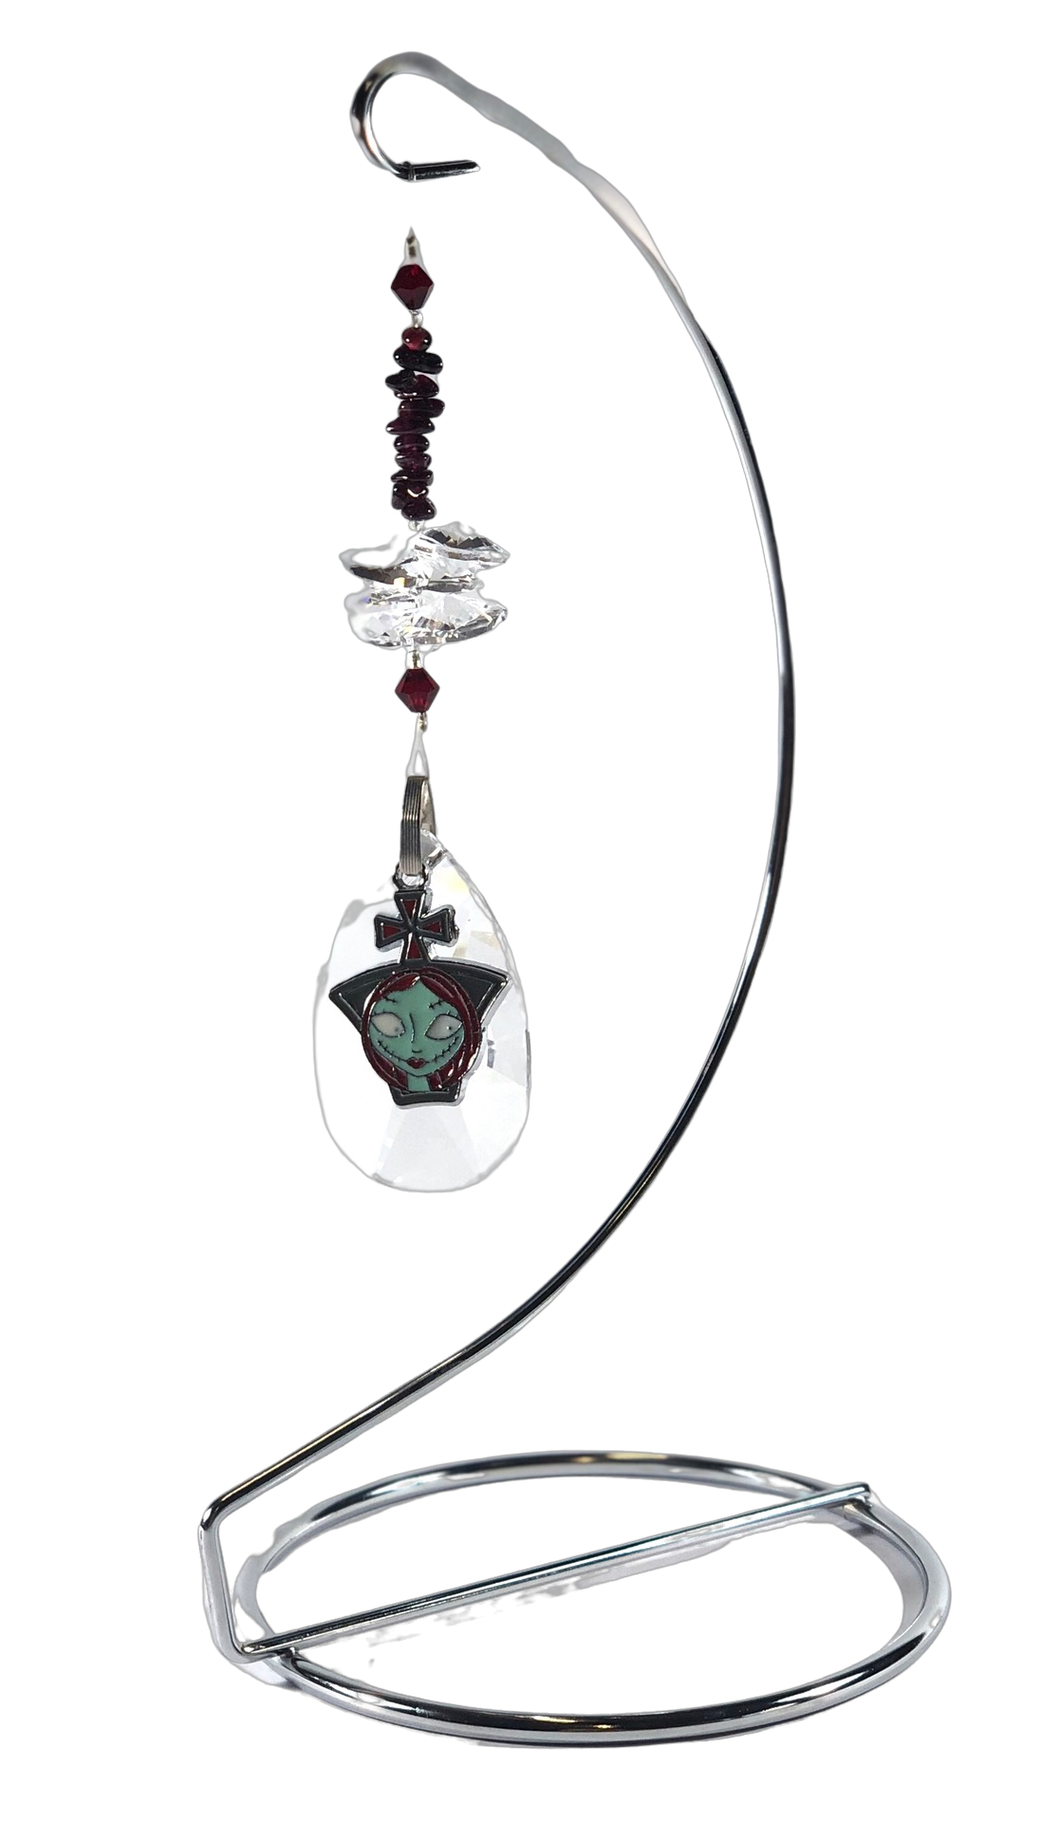 A Nightmare Before Christmas - Sally crystal suncatcher is decorated with garnet gemstones and come on this amazing stand.